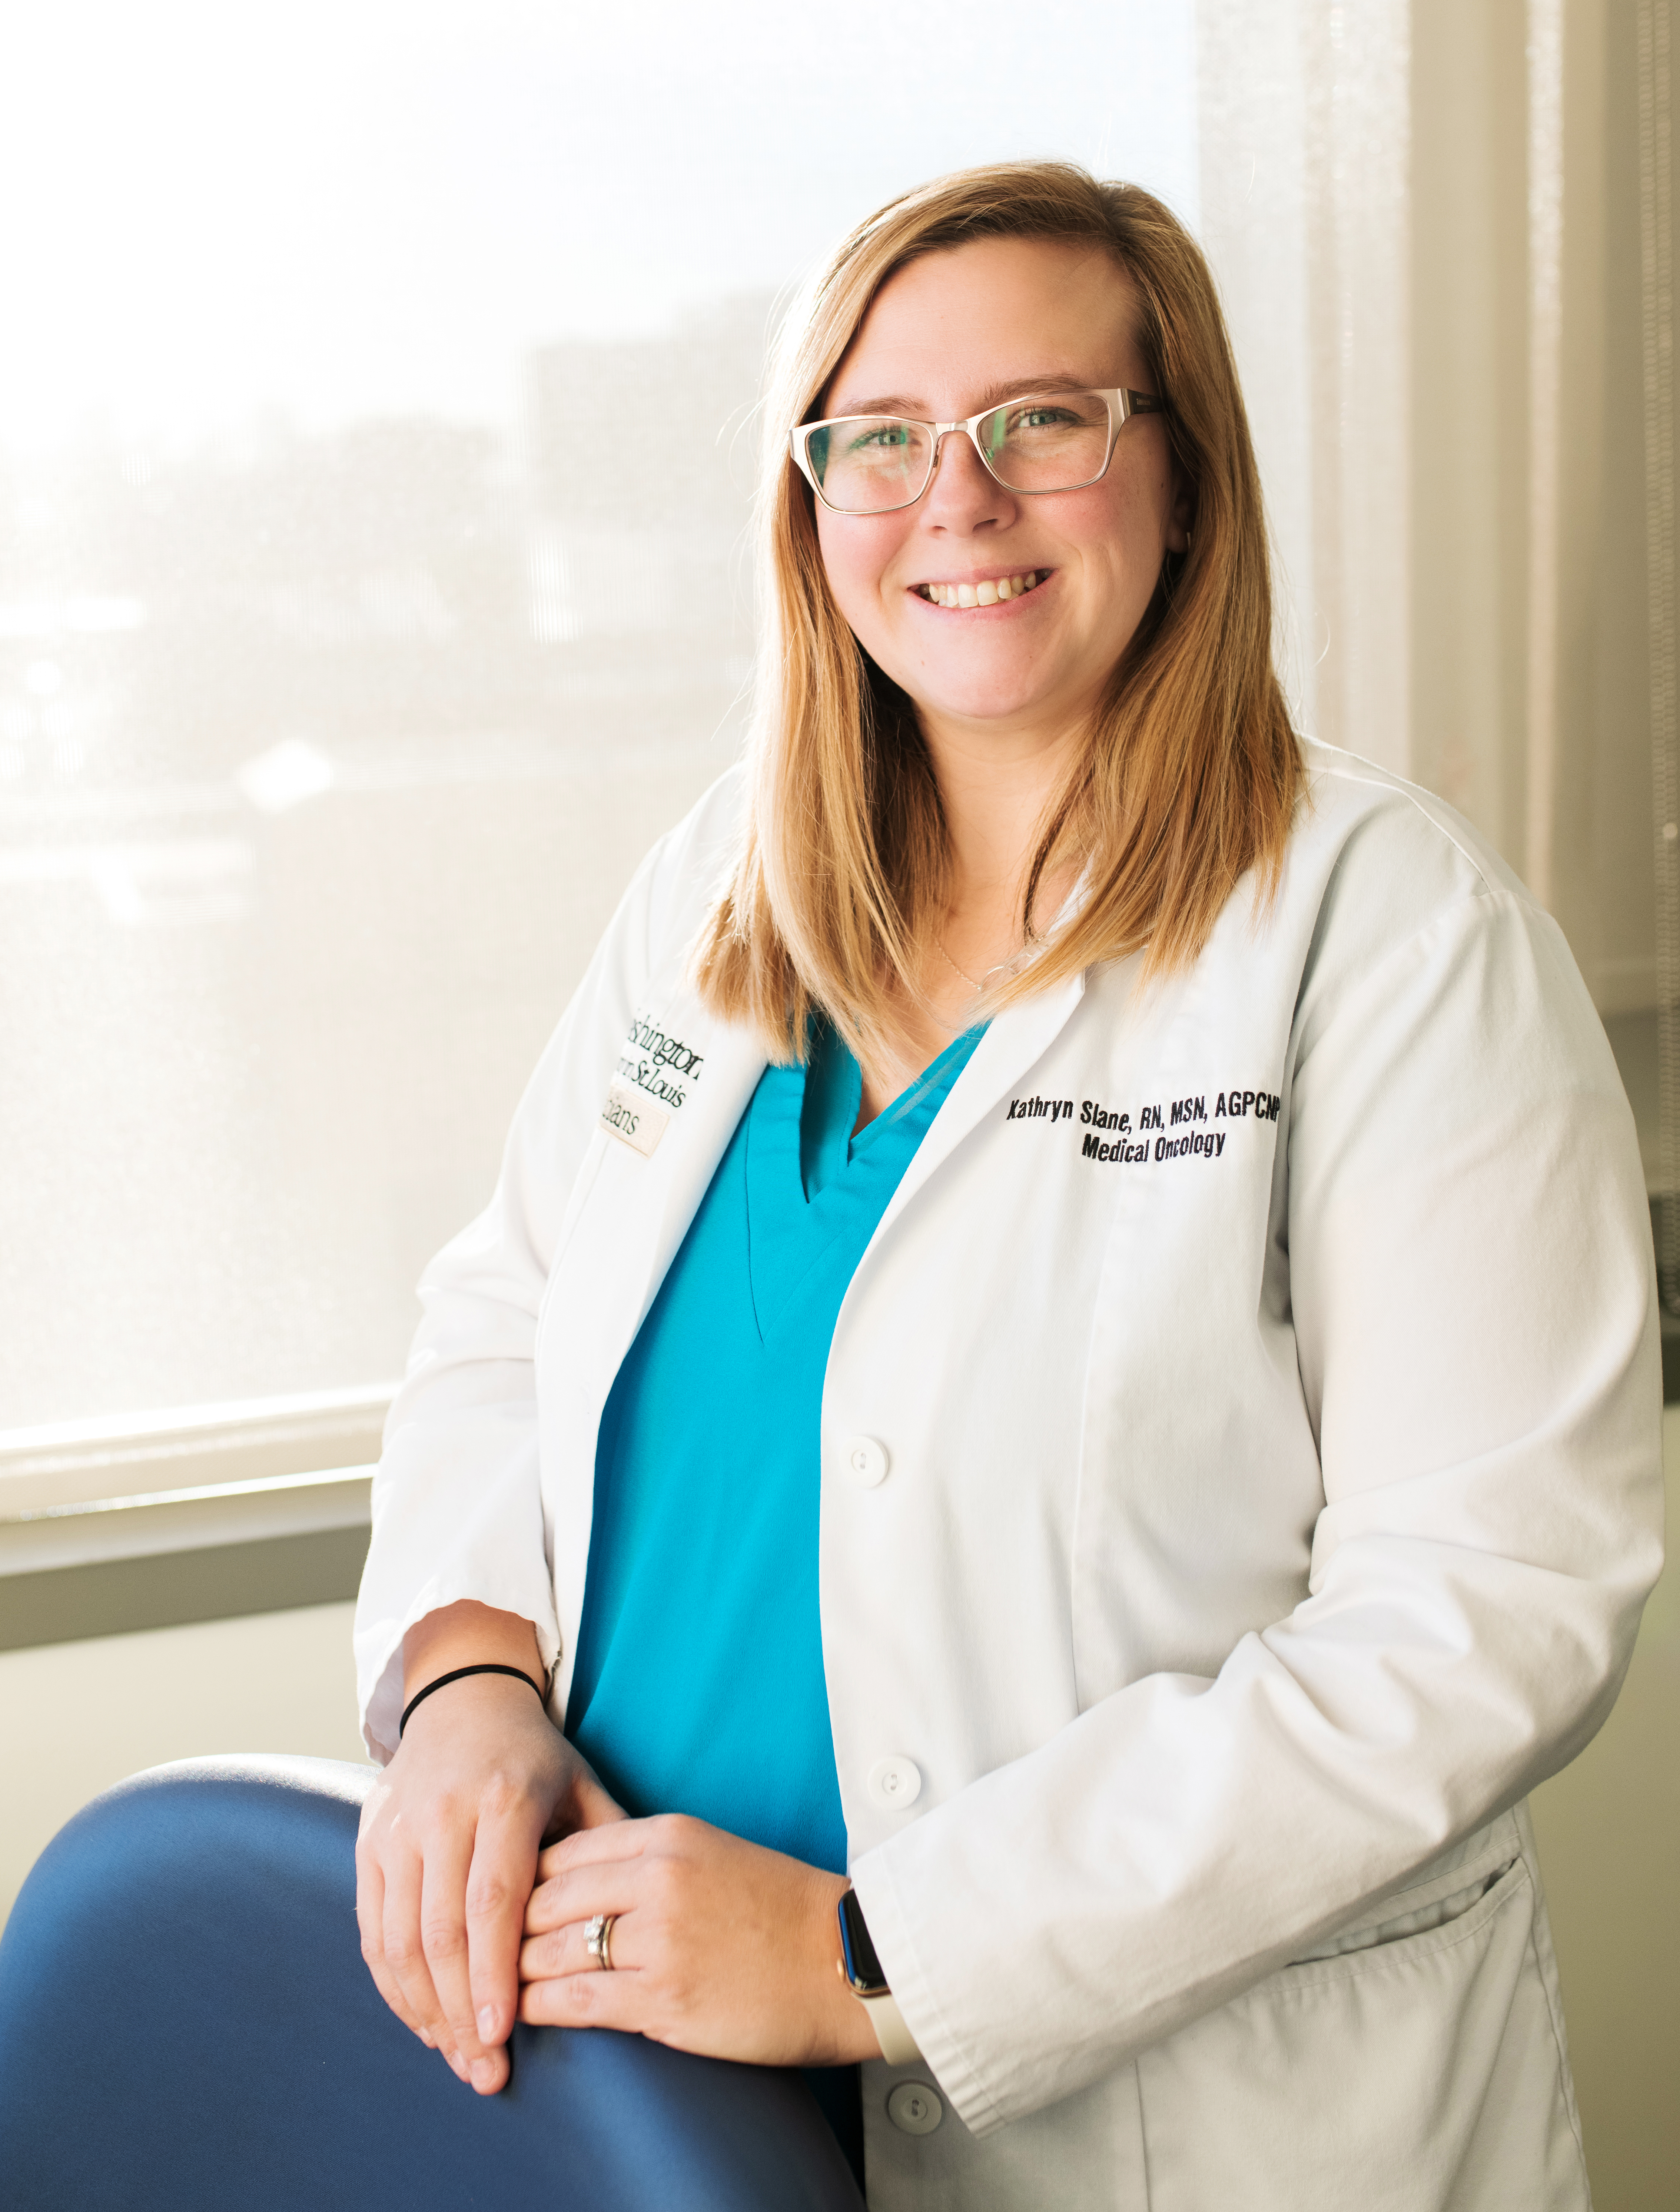 ONS member Kathryn Slane, MSN, AGPCNP-BC, AOCNP®, advanced oncology certified nurse practitioner at the Siteman Cancer Center and Washington University School of Medicine in St. Louis, MO, and member of the St. Louis ONS Chapter